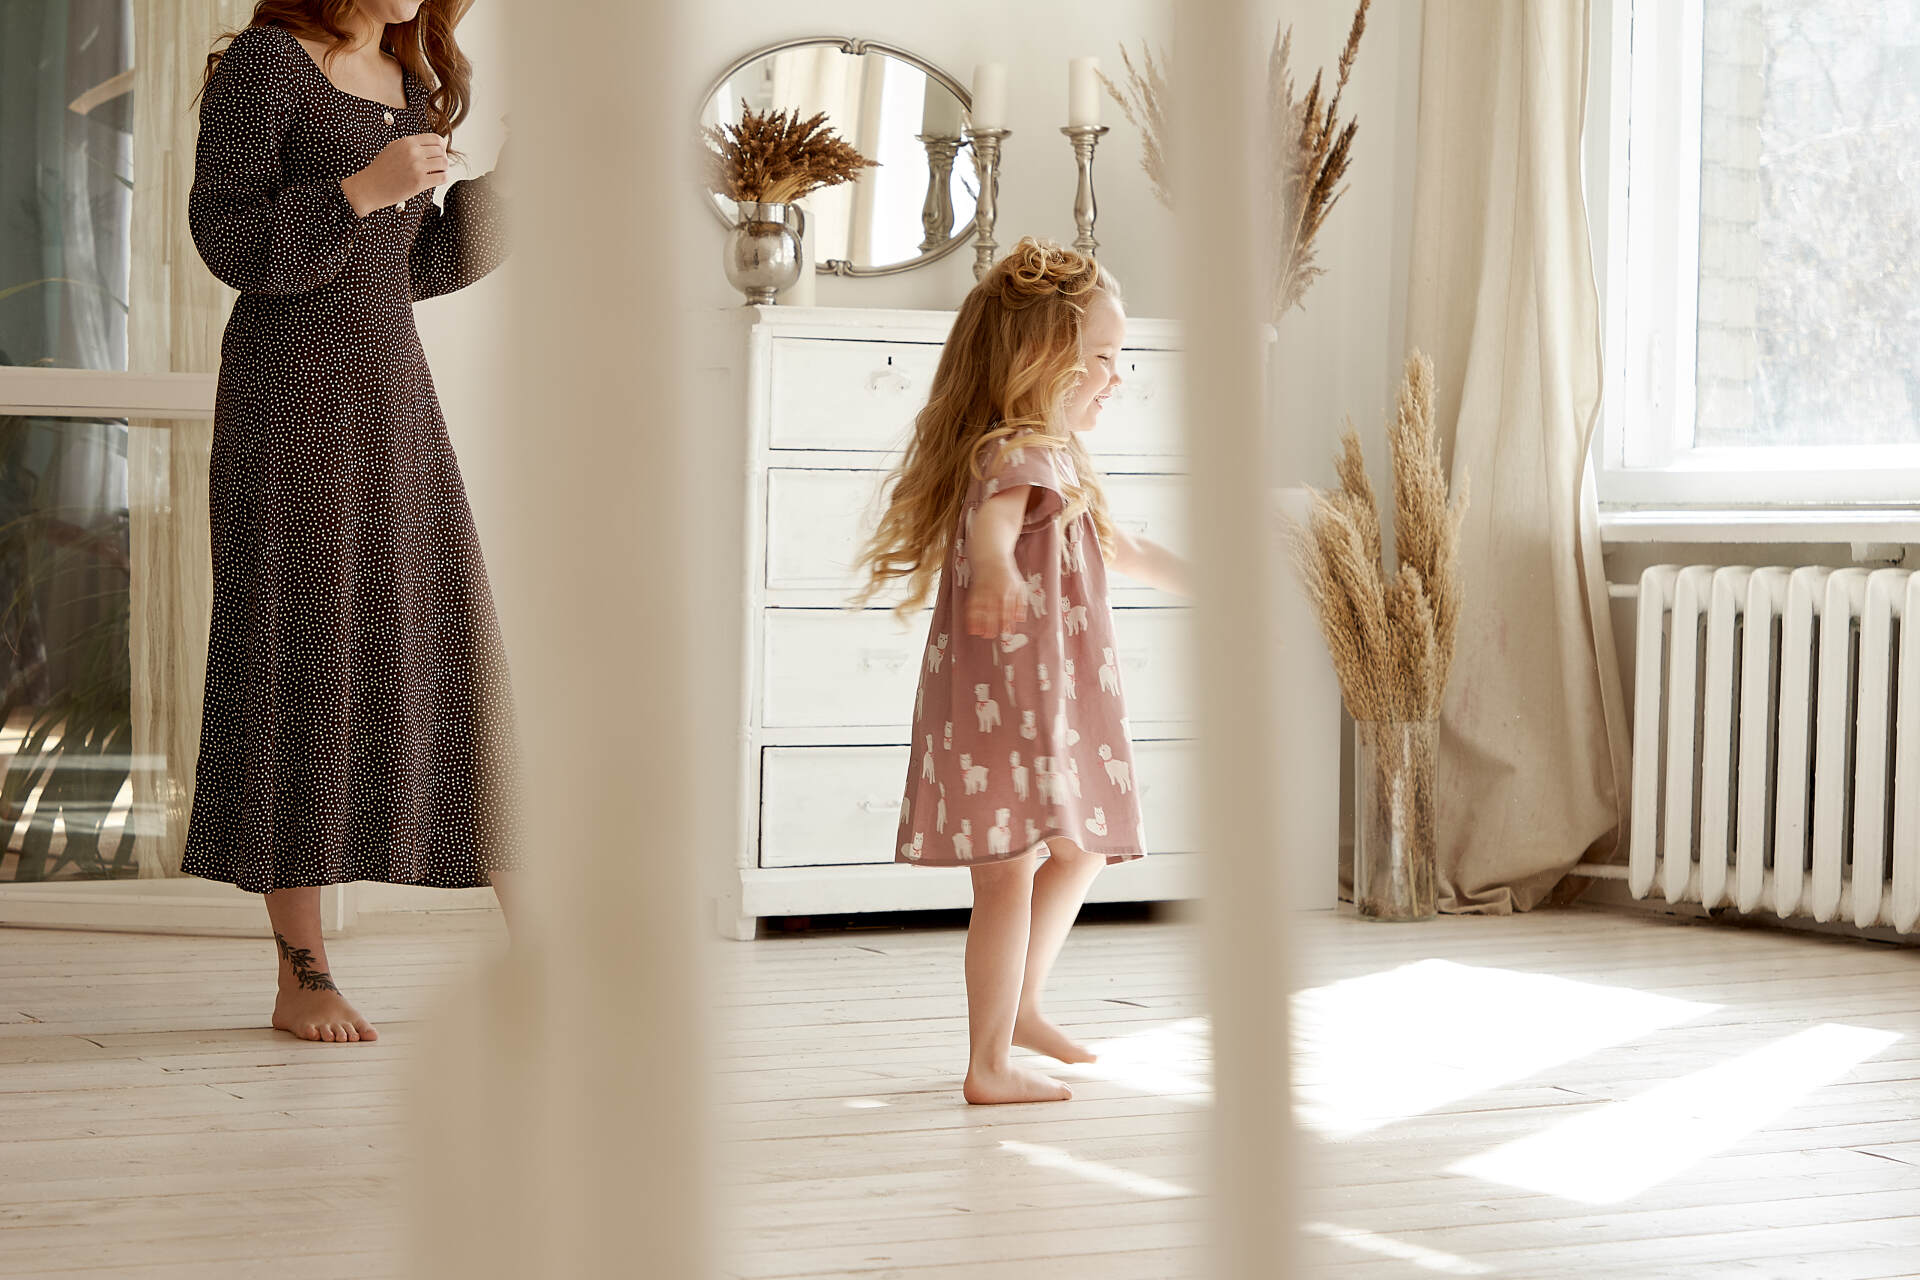 A woman and a little girl are standing in a living room.